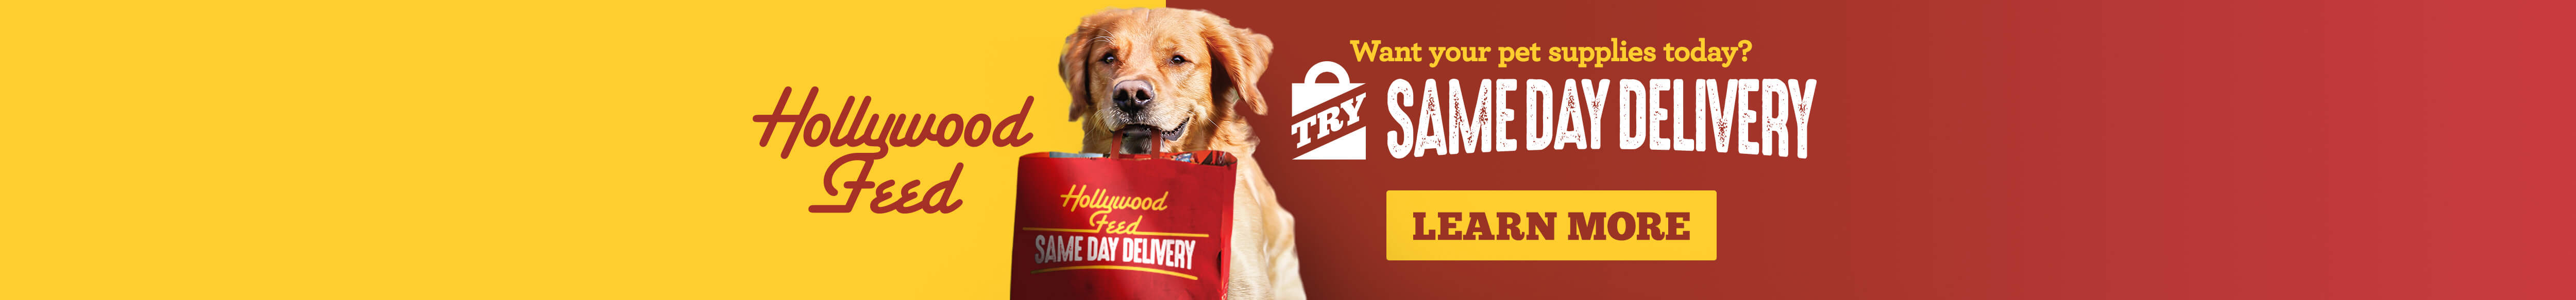 want your pet & dog supplies today? Try Hollywood Feed Same Day Delivery. Click to Learn More